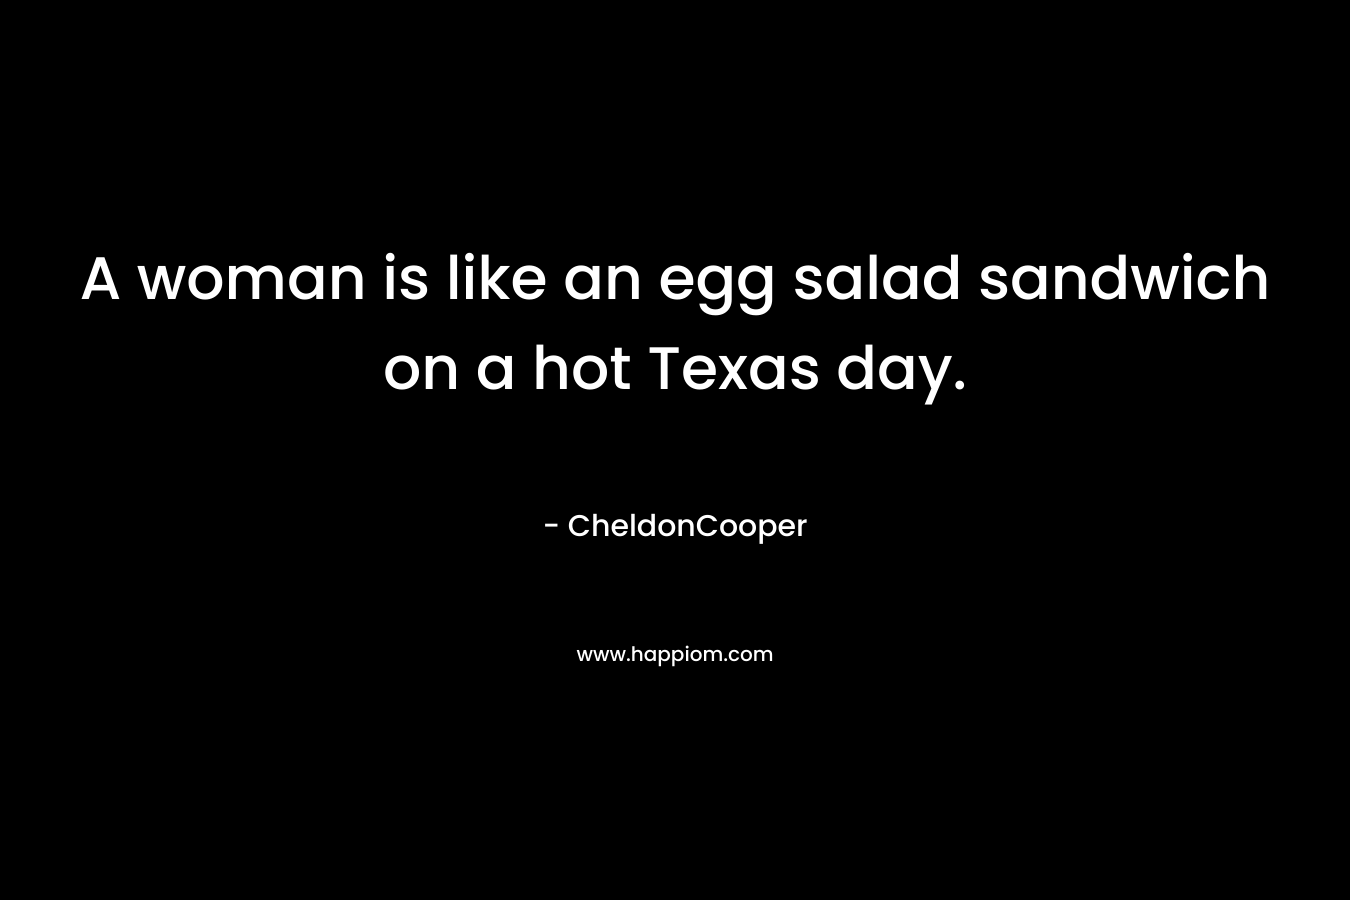 A woman is like an egg salad sandwich on a hot Texas day. – CheldonCooper